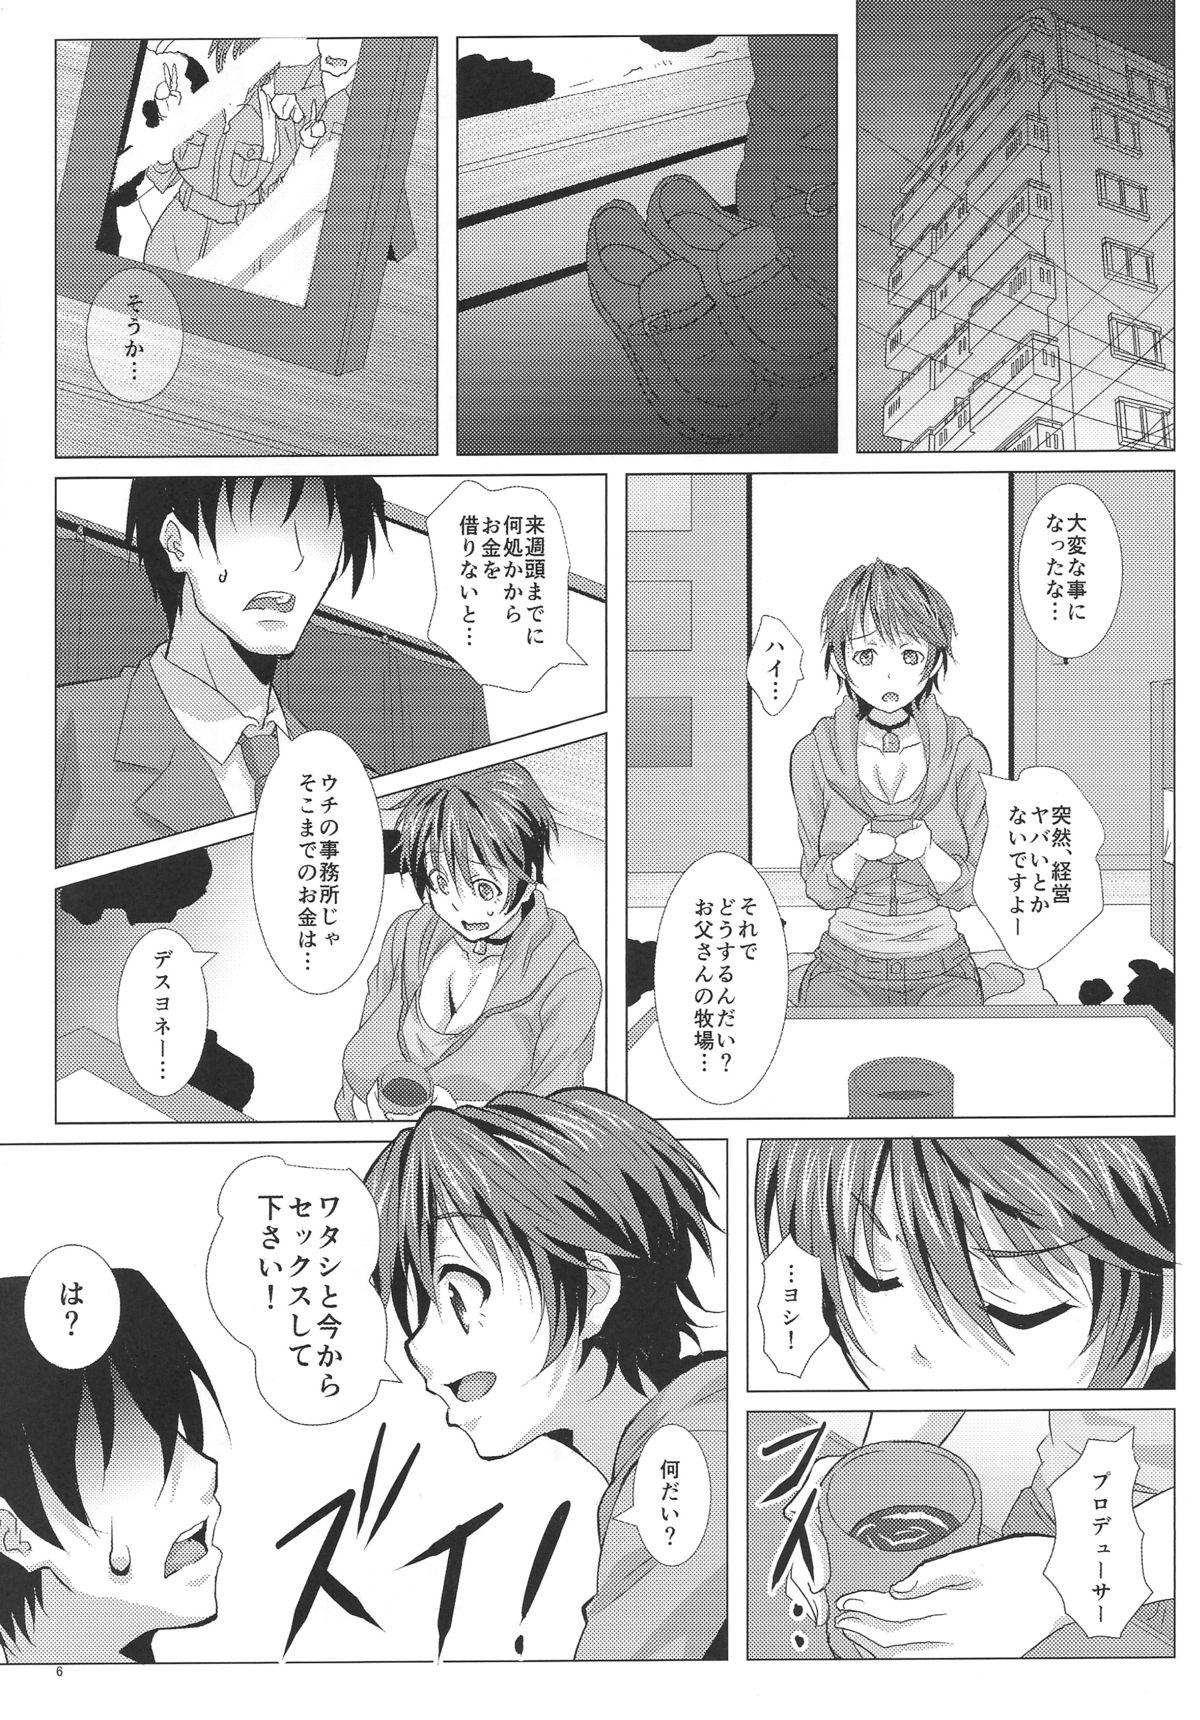 Boyfriend THE PAIDOLM@STER - The idolmaster Soft - Page 5